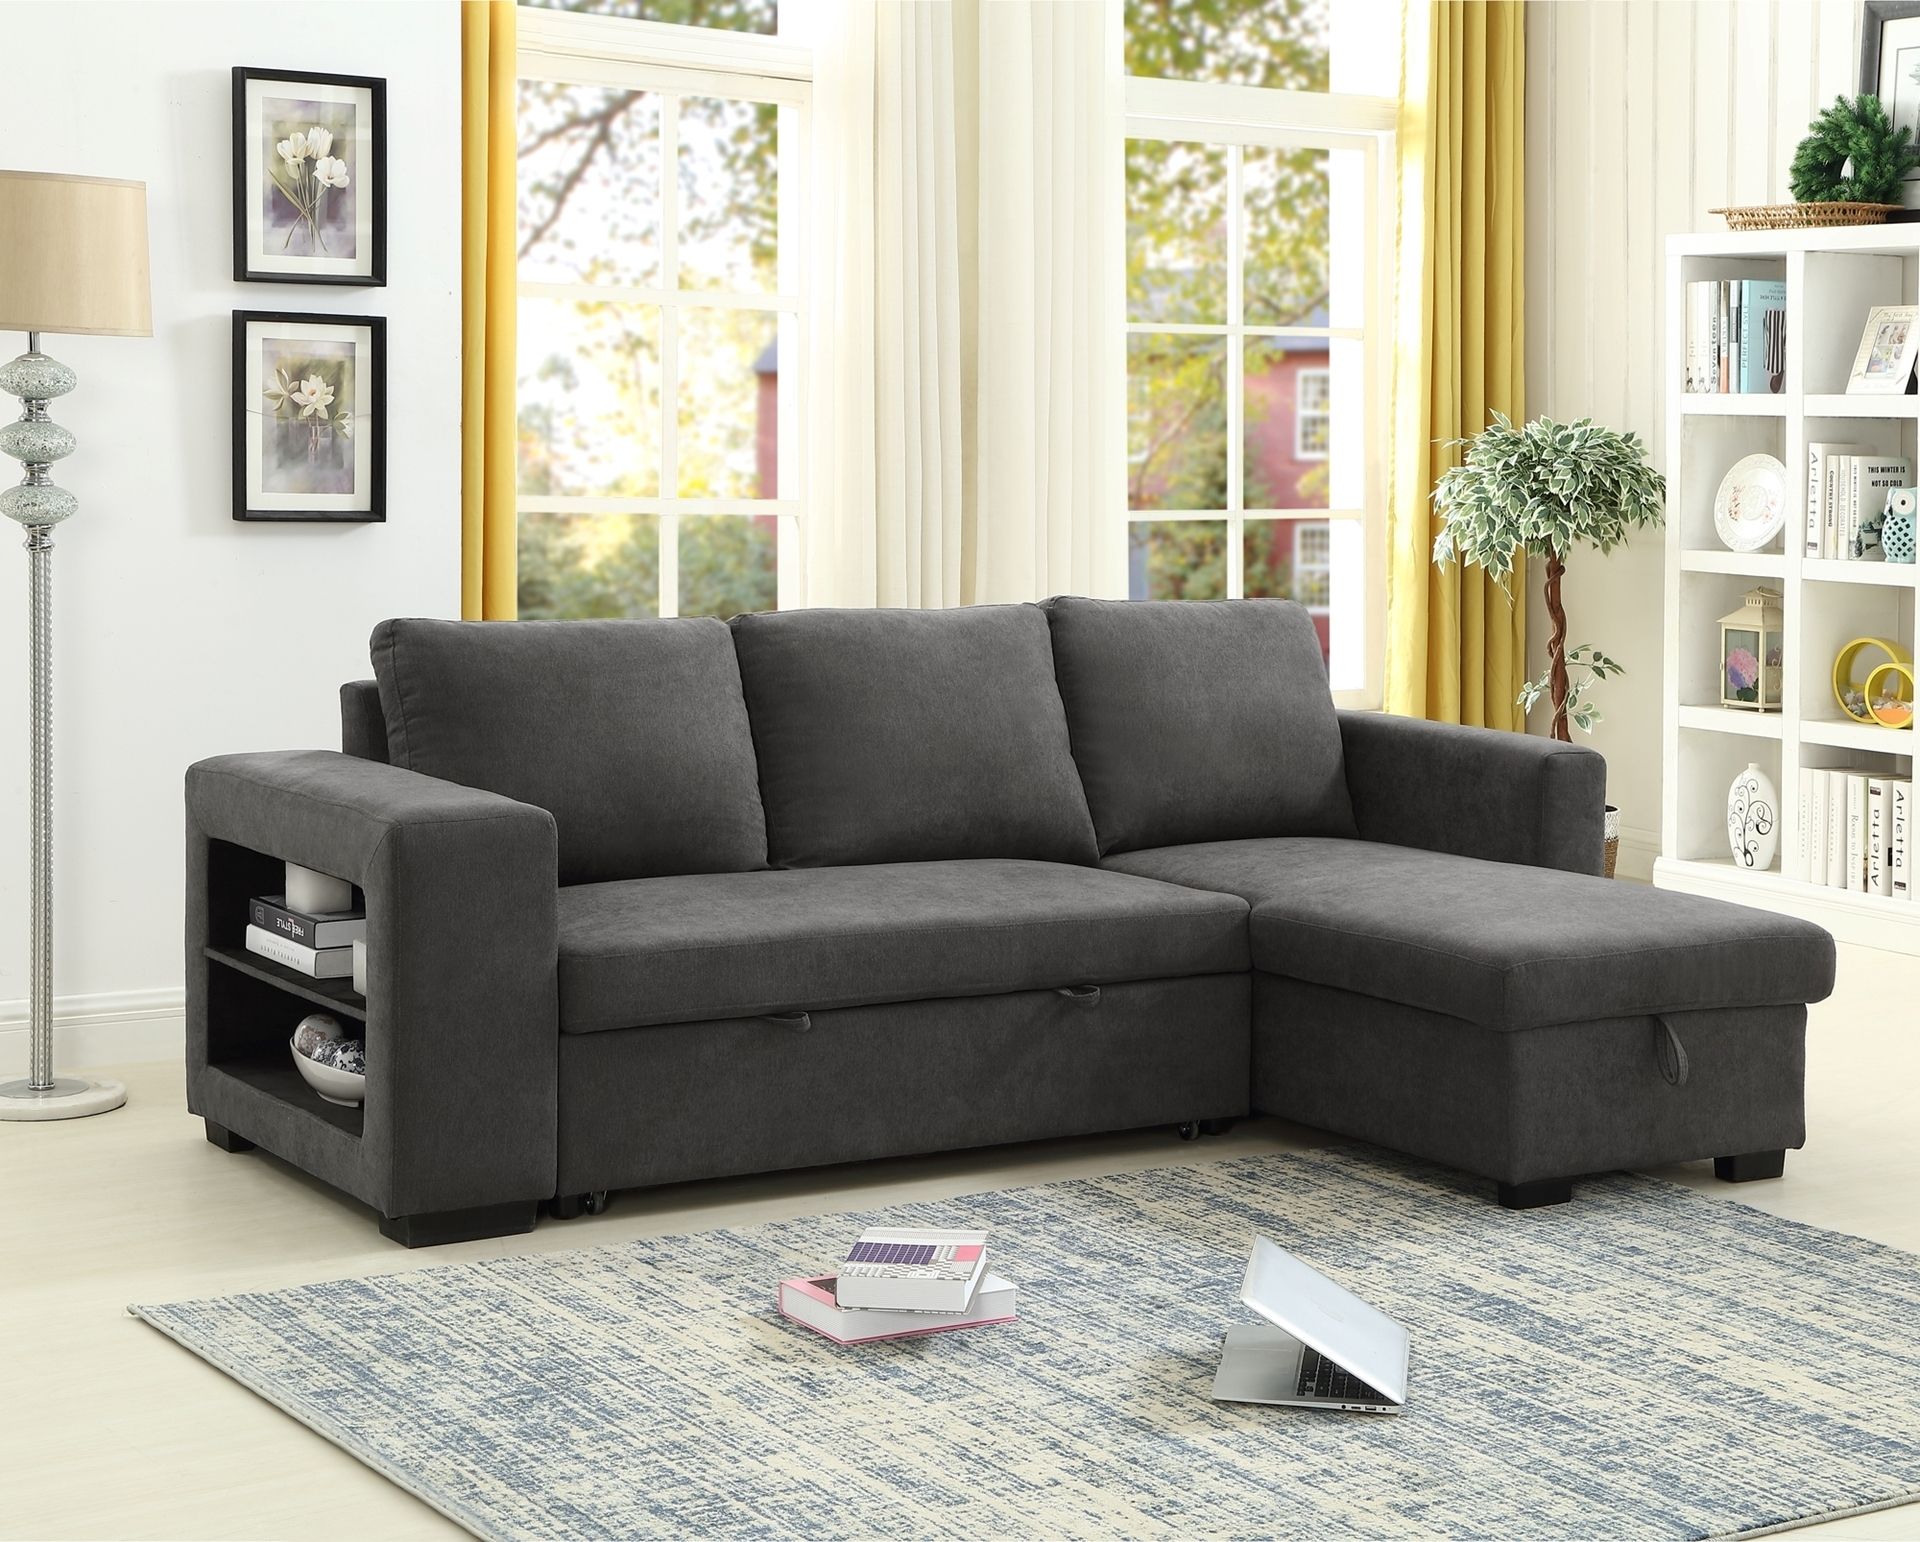 Lucena Reversible Sectional Sofa/sofa Bed With Storage Throughout Palisades Reversible Small Space Sectional Sofas With Storage (View 3 of 15)